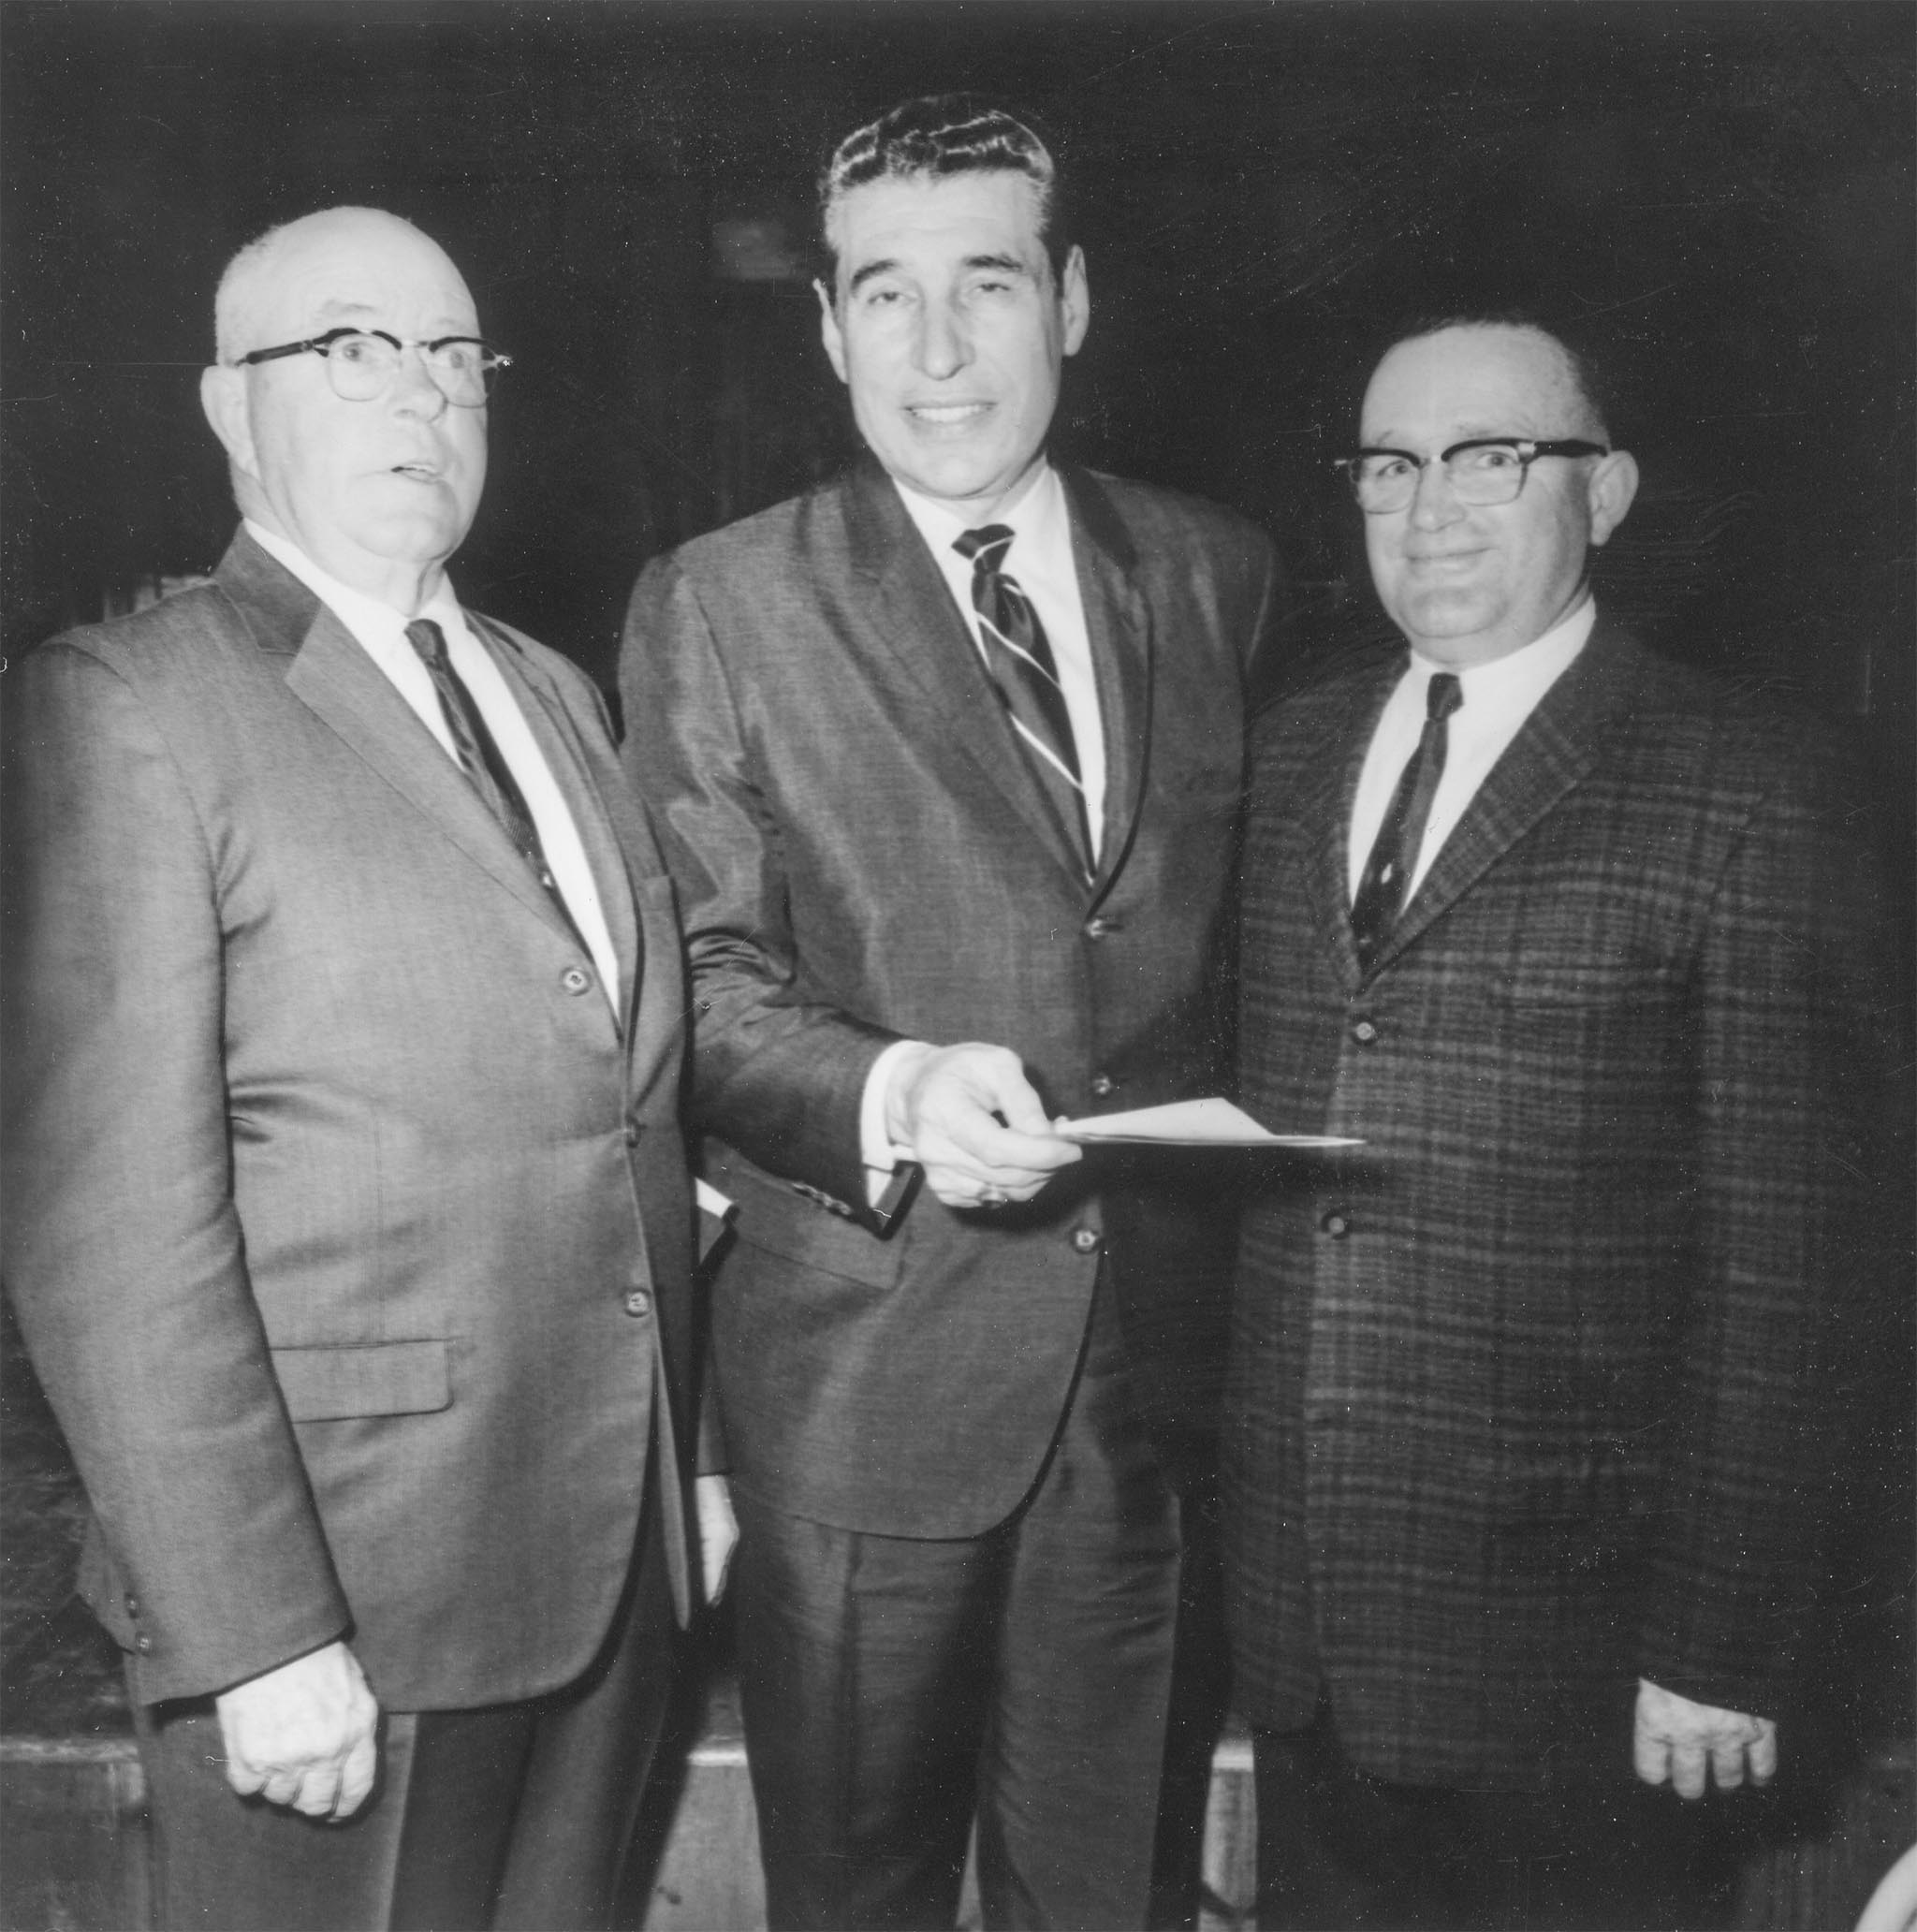 This 1968 photo, taken at the Garvin County Farm City dinner, features Dr. Robert B. Kamm, President of Oklahoma State University (center), discussing current issues with A.J. Chapman, Garvin County Legislative Chairman (left), and O.W. Parker, Garvin County President. Kamm was the principal speaker for the 300 people who attended the dinner.